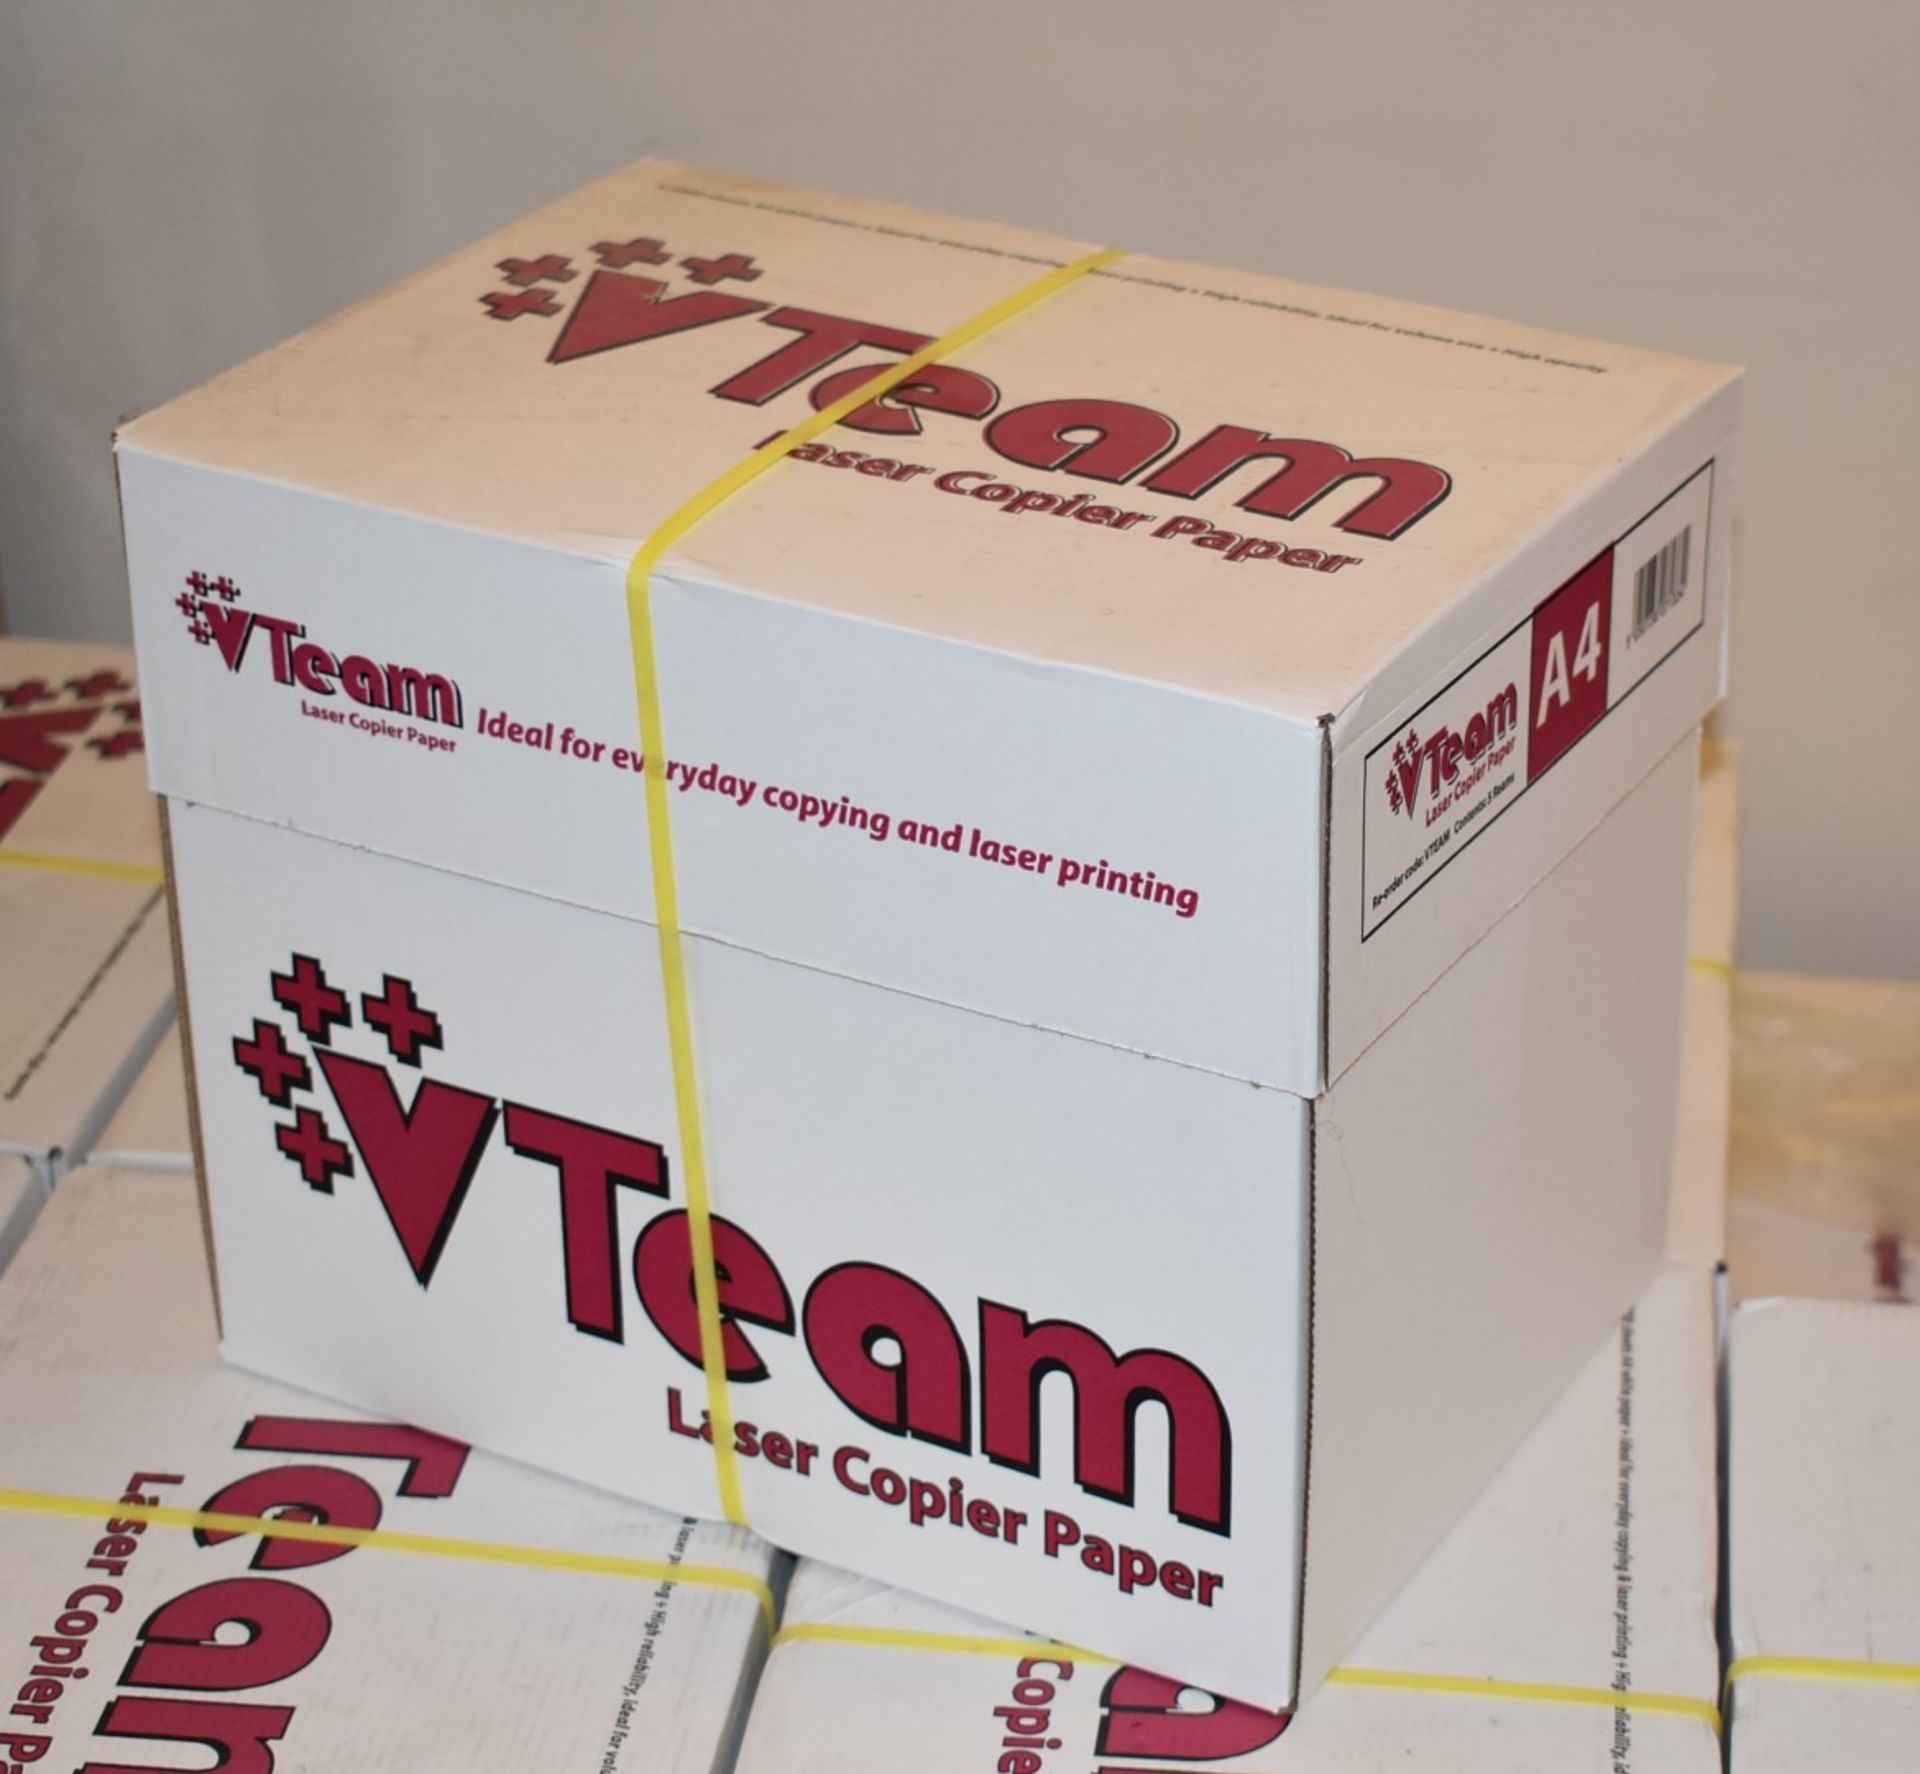 10 x Packs of Vteam A4 Laser Copy Paper - 500 Sheets Per Pack - Includes 2 x Boxes of 5 x Reams - Image 4 of 6